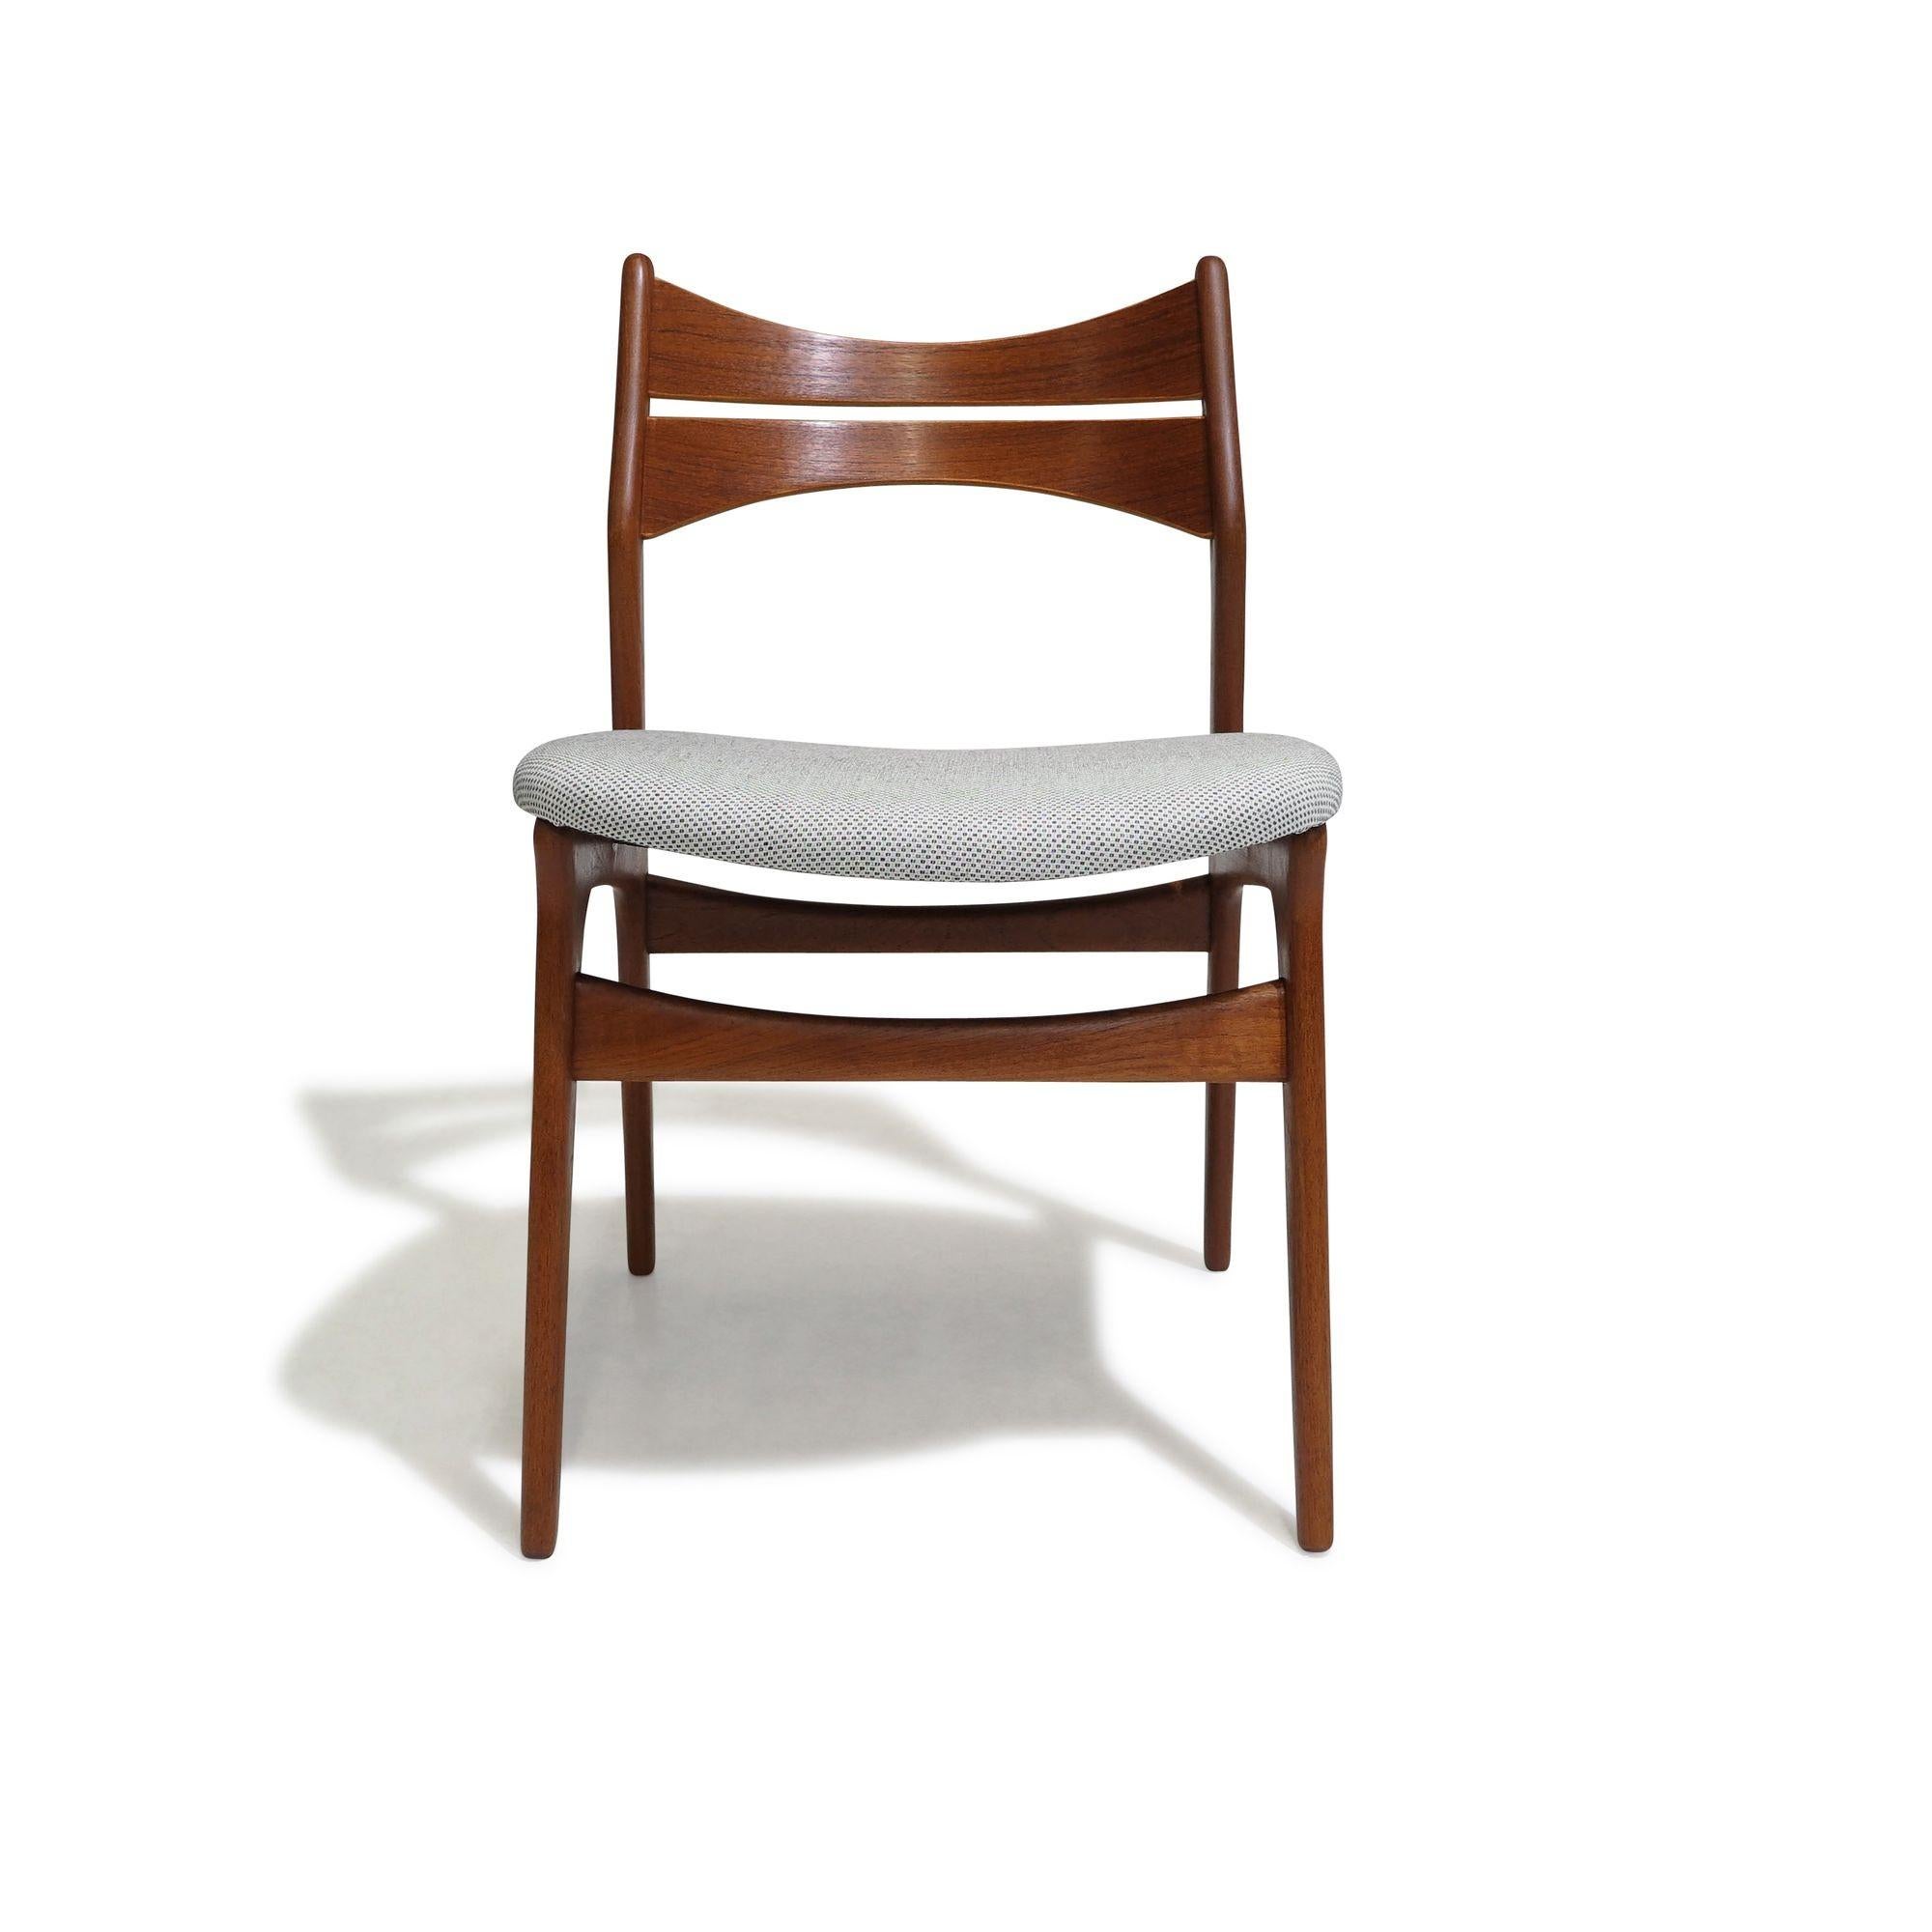 Set of four mid-century teak dining chairs designed by Erik Buch for Christensen Denmark, Model 310. Featuring a solid teak frame with comfortable angled backrests, these chairs have newly upholstered seats in an off-white grey